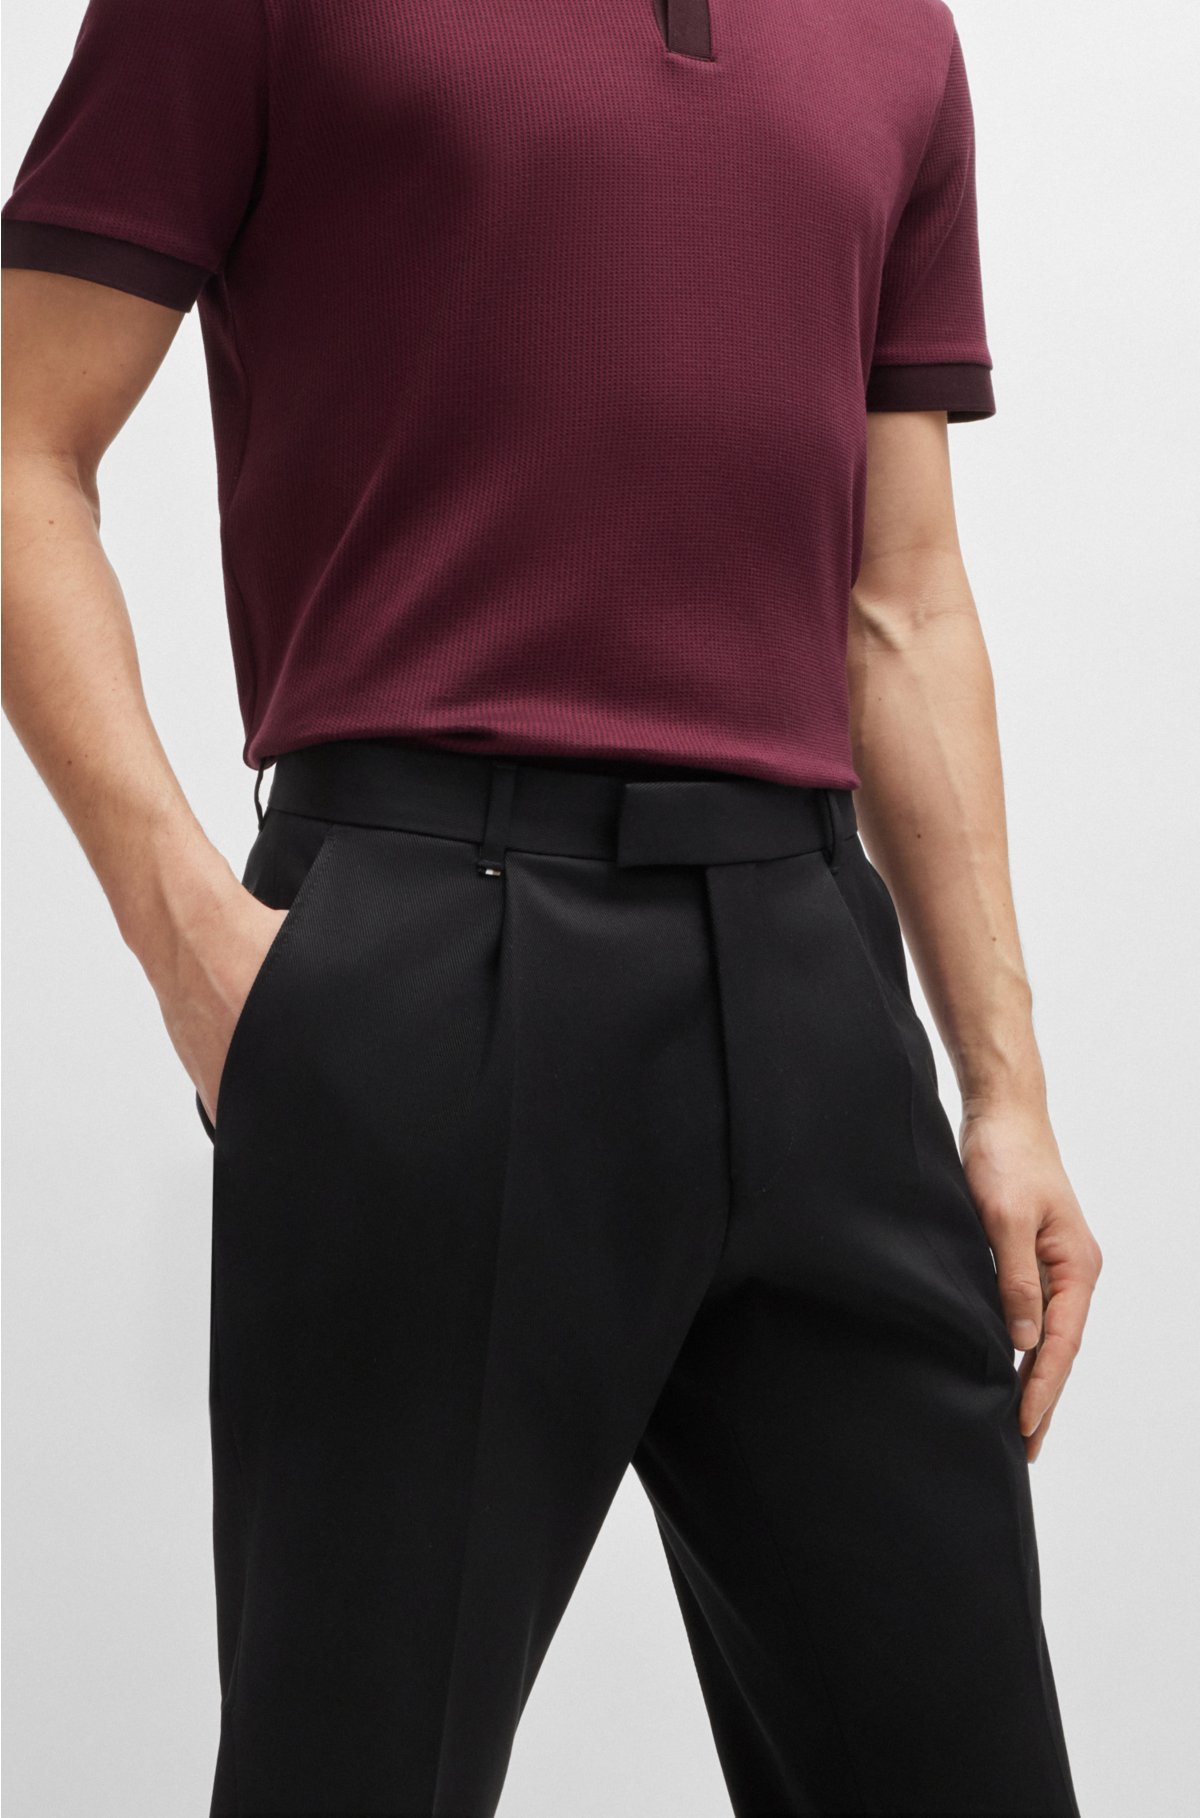 Relaxed-fit trousers in stretch fabric with pleat front, Black